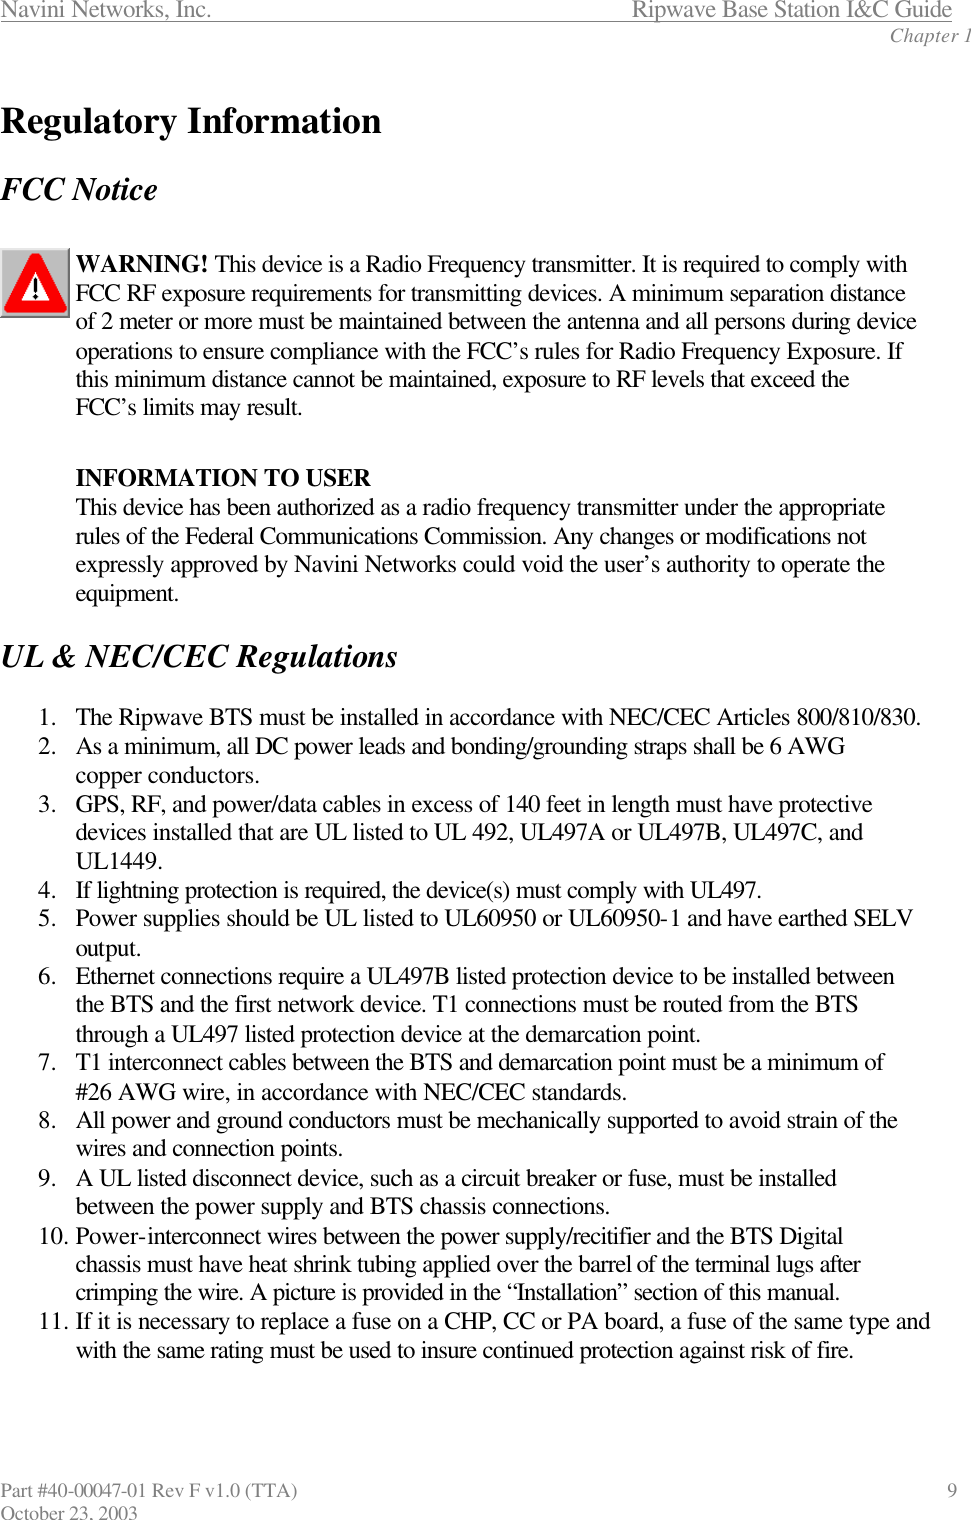 Navini Networks, Inc.                      Ripwave Base Station I&amp;C Guide Chapter 1 Part #40-00047-01 Rev F v1.0 (TTA)                               9 October 23, 2003  Regulatory Information  FCC Notice  WARNING! This device is a Radio Frequency transmitter. It is required to comply with FCC RF exposure requirements for transmitting devices. A minimum separation distance of 2 meter or more must be maintained between the antenna and all persons during device operations to ensure compliance with the FCC’s rules for Radio Frequency Exposure. If this minimum distance cannot be maintained, exposure to RF levels that exceed the FCC’s limits may result.   INFORMATION TO USER This device has been authorized as a radio frequency transmitter under the appropriate rules of the Federal Communications Commission. Any changes or modifications not expressly approved by Navini Networks could void the user’s authority to operate the equipment.  UL &amp; NEC/CEC Regulations  1.  The Ripwave BTS must be installed in accordance with NEC/CEC Articles 800/810/830. 2.  As a minimum, all DC power leads and bonding/grounding straps shall be 6 AWG copper conductors. 3.  GPS, RF, and power/data cables in excess of 140 feet in length must have protective devices installed that are UL listed to UL 492, UL497A or UL497B, UL497C, and UL1449. 4.  If lightning protection is required, the device(s) must comply with UL497. 5.  Power supplies should be UL listed to UL60950 or UL60950-1 and have earthed SELV output. 6.  Ethernet connections require a UL497B listed protection device to be installed between the BTS and the first network device. T1 connections must be routed from the BTS through a UL497 listed protection device at the demarcation point. 7.  T1 interconnect cables between the BTS and demarcation point must be a minimum of #26 AWG wire, in accordance with NEC/CEC standards. 8.  All power and ground conductors must be mechanically supported to avoid strain of the wires and connection points. 9.  A UL listed disconnect device, such as a circuit breaker or fuse, must be installed between the power supply and BTS chassis connections. 10. Power-interconnect wires between the power supply/recitifier and the BTS Digital chassis must have heat shrink tubing applied over the barrel of the terminal lugs after crimping the wire. A picture is provided in the “Installation” section of this manual. 11. If it is necessary to replace a fuse on a CHP, CC or PA board, a fuse of the same type and with the same rating must be used to insure continued protection against risk of fire.  